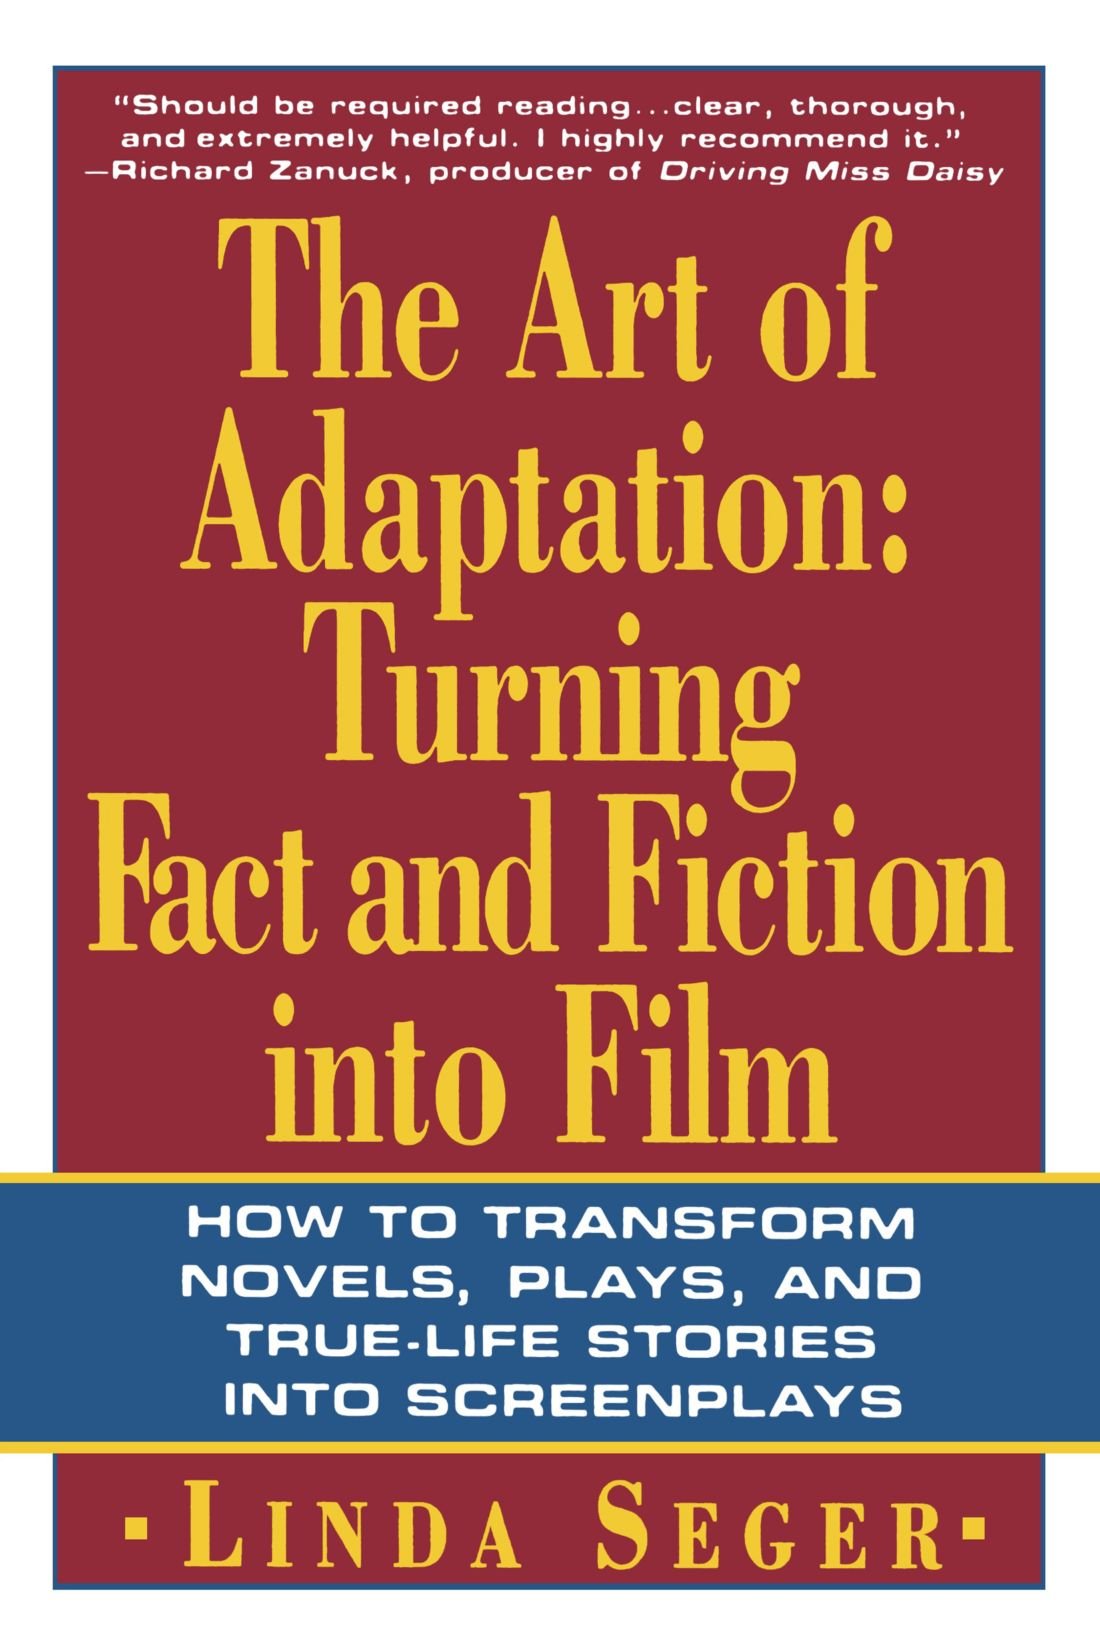 The Art of Adaptation: Turning Fact And Fiction Into Film